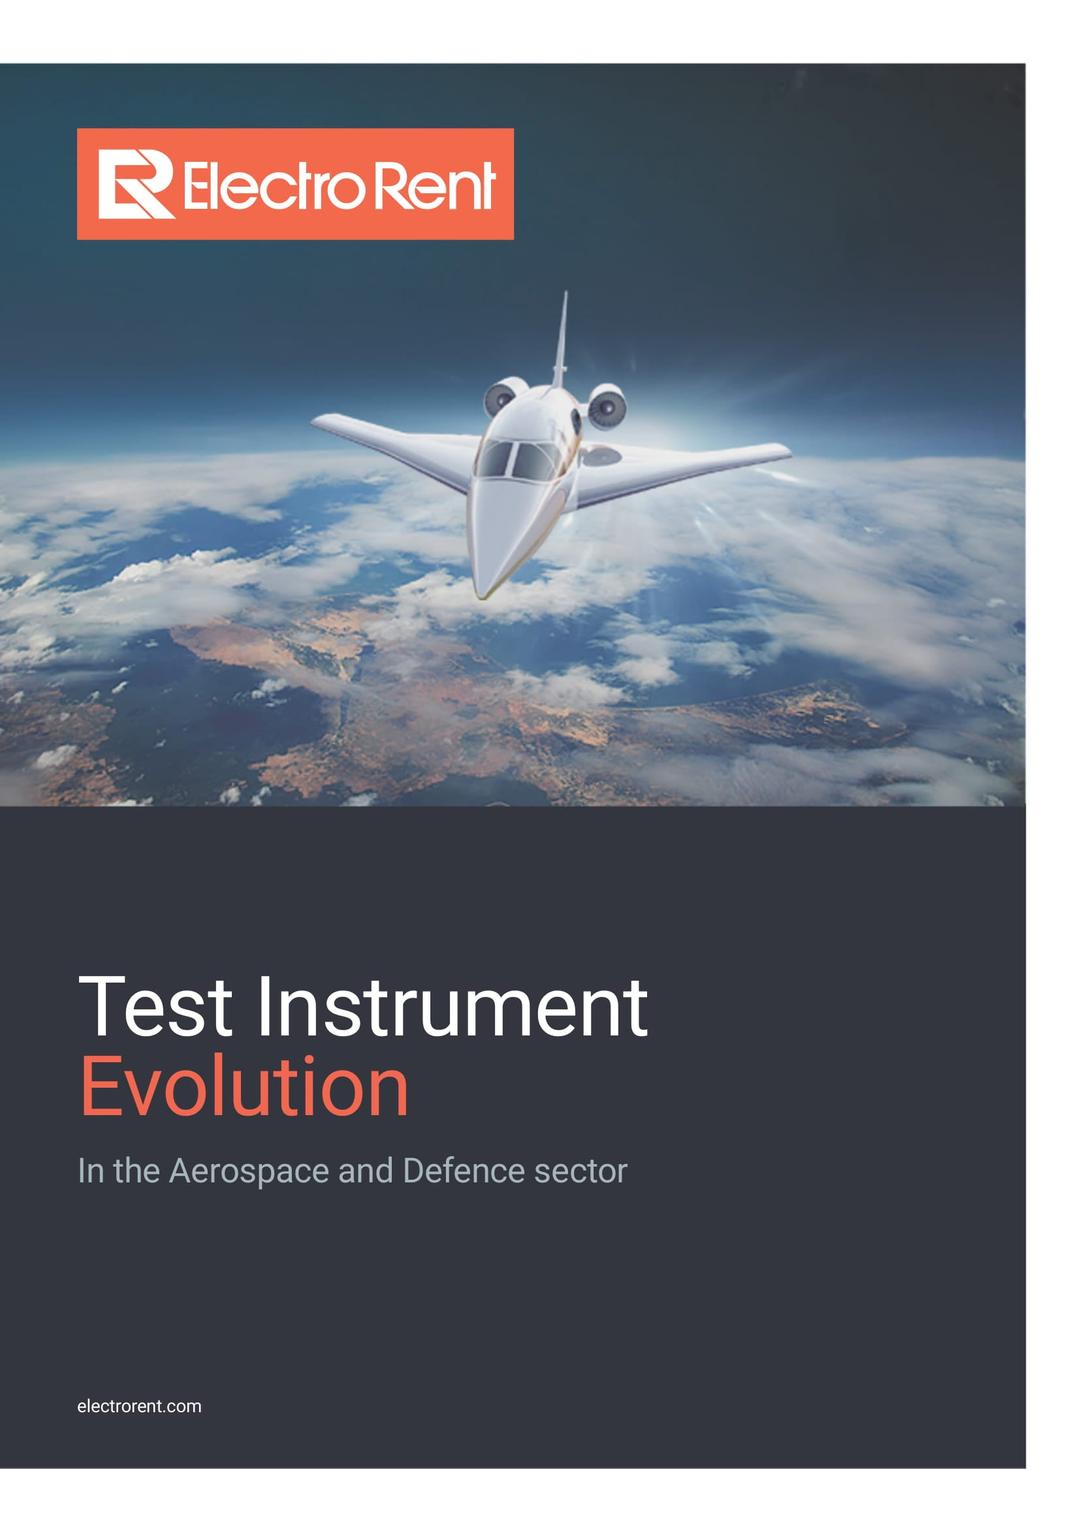 Test Instrument Evolution - In the A&D Sector, image